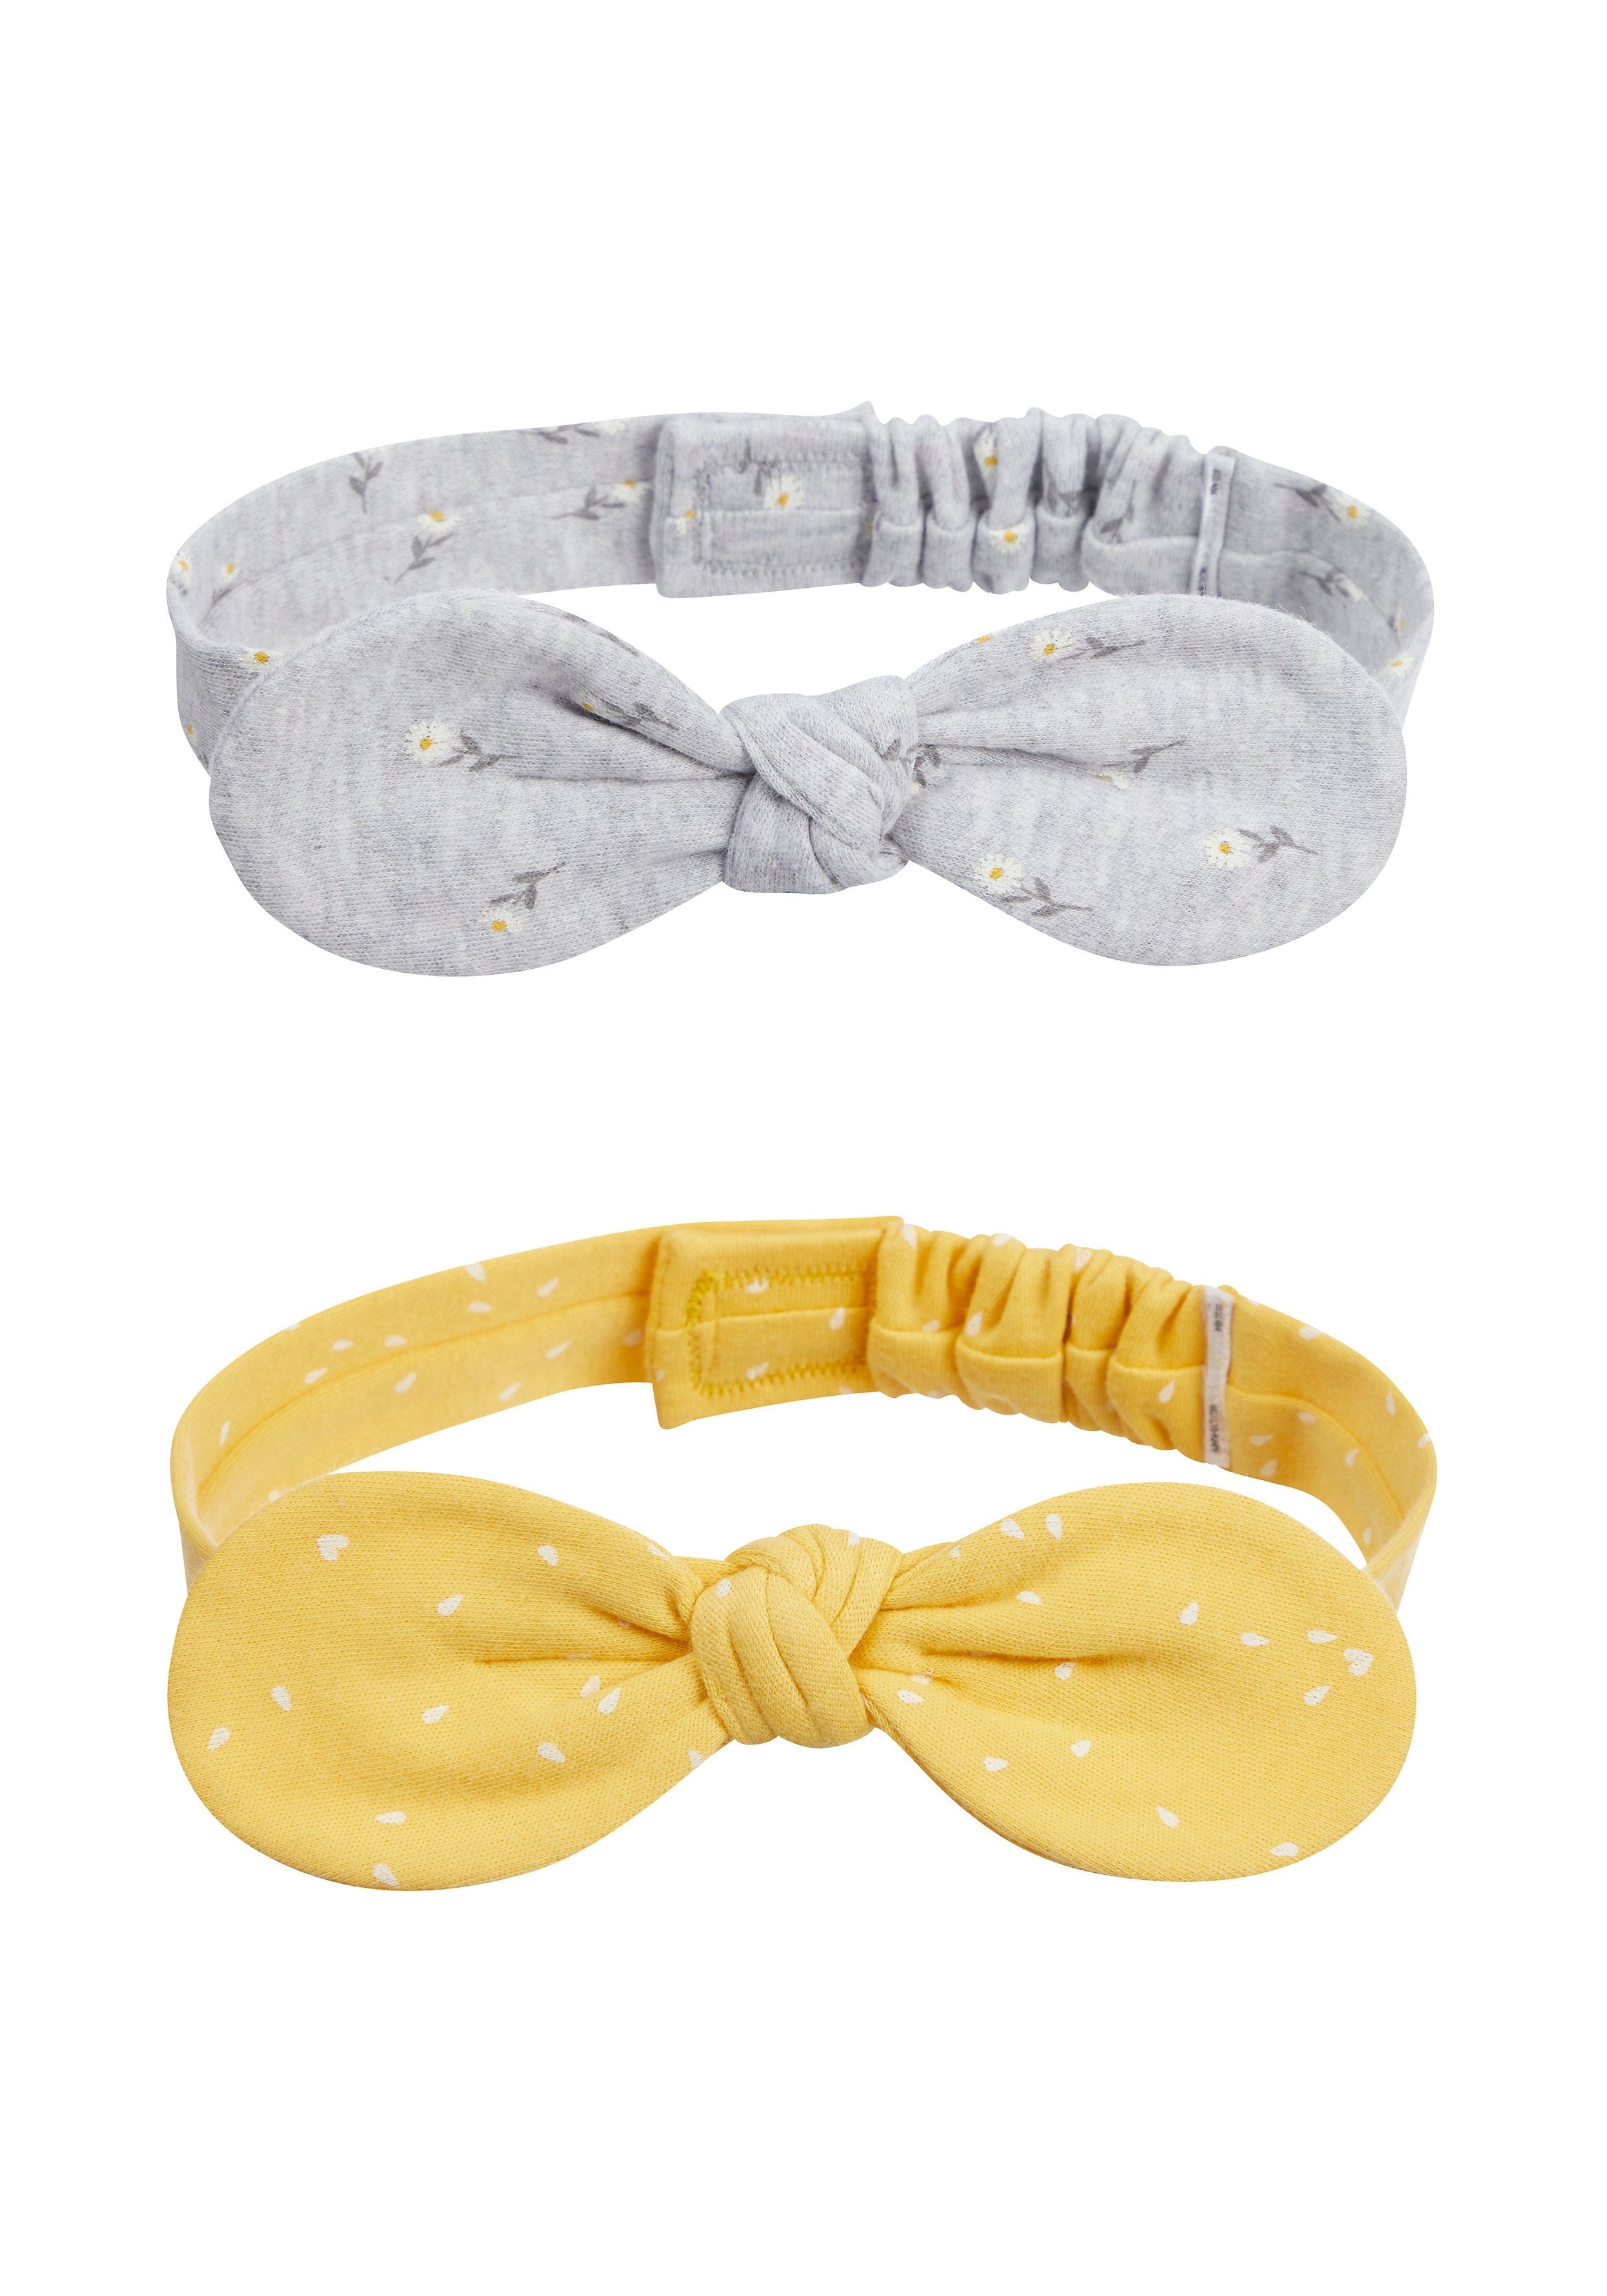 Girls Bow Baby Headbands - 2 Pack - Multicolor